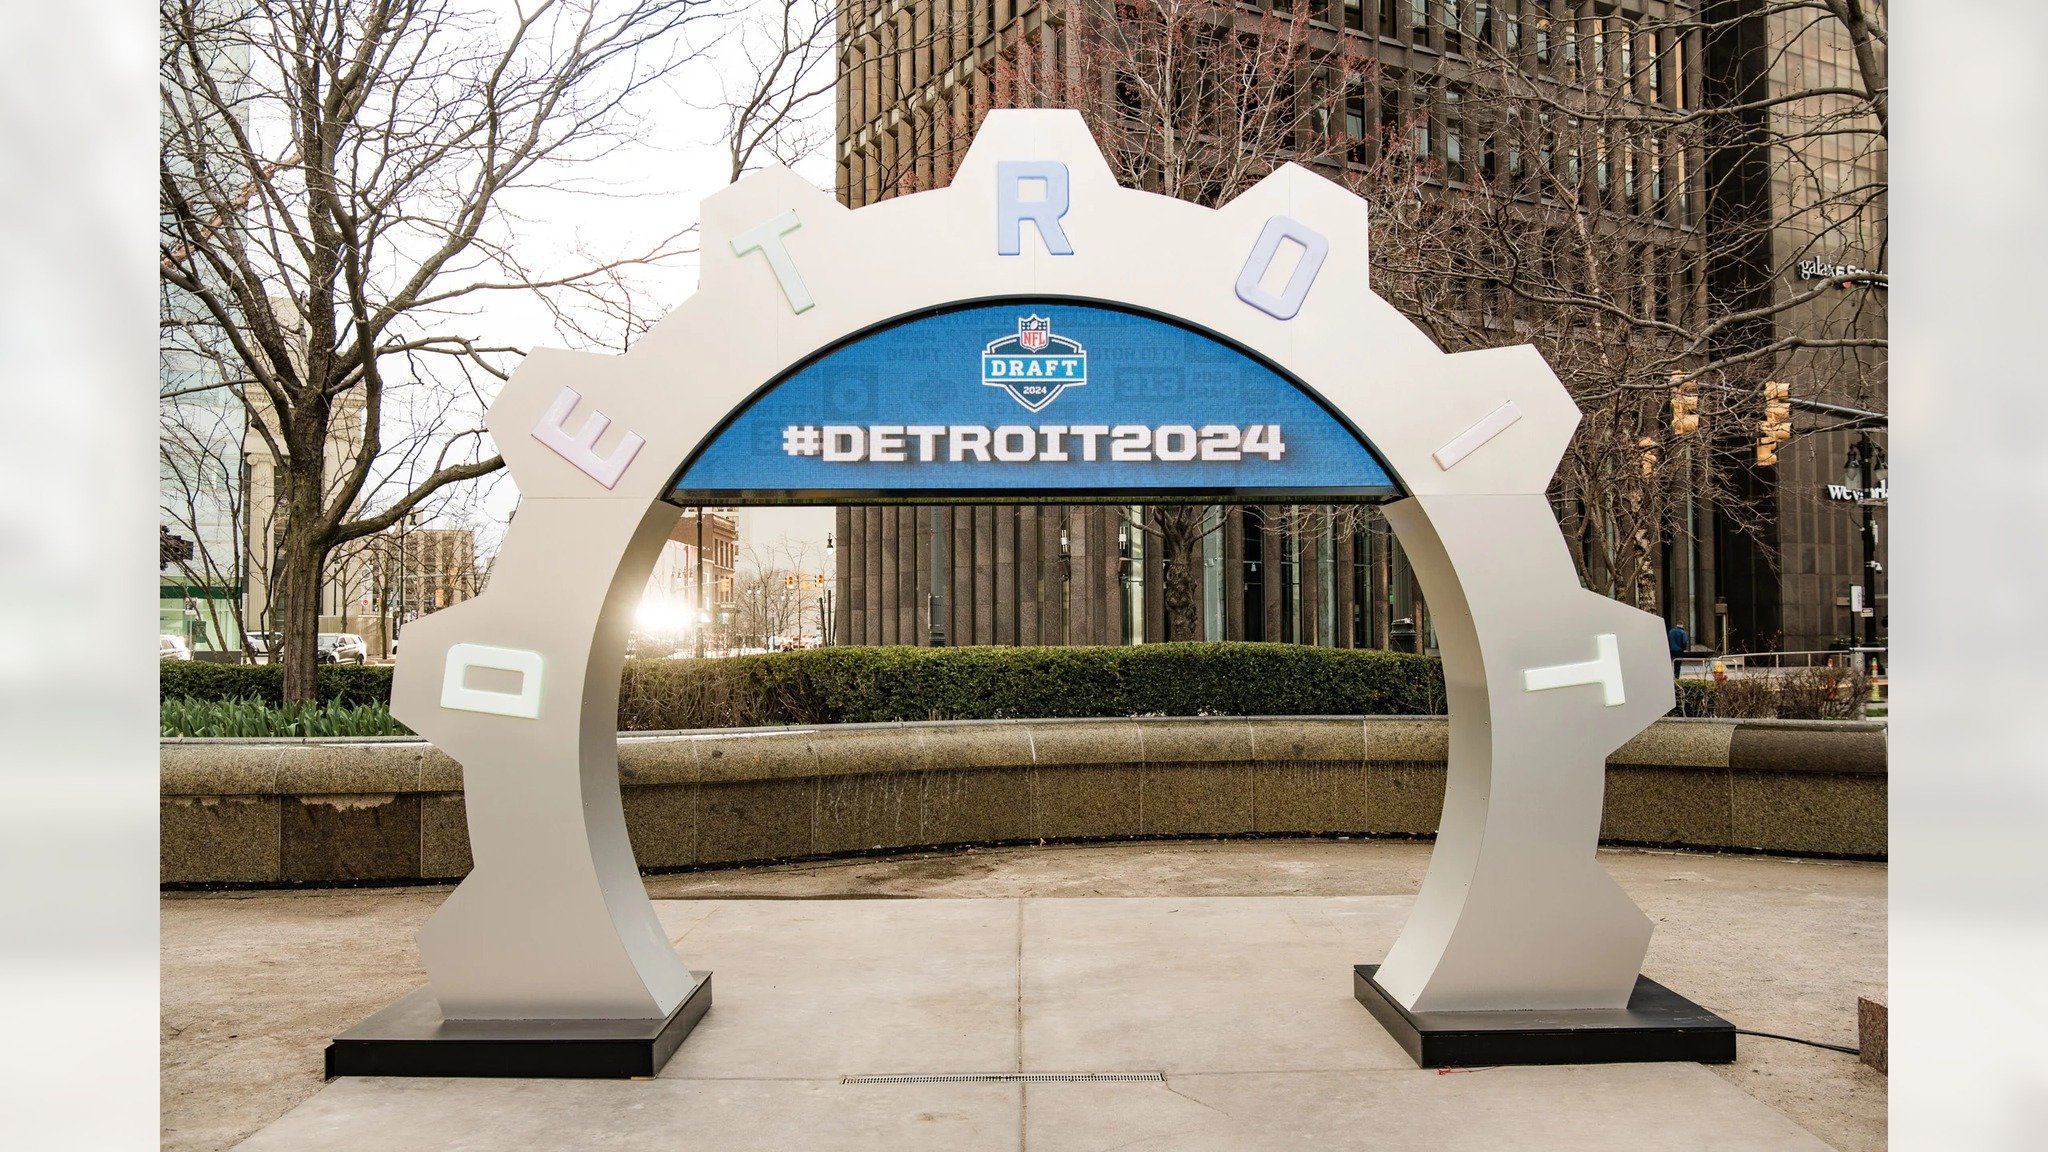 Happy Draft Day, Detroit! The excitement is in the air as the 2024 NFL Draft kicks off in our beloved city! 

Let's welcome the next generation of football talent with open arms and show them why Detroit is the heart of the game. Who's ready for some